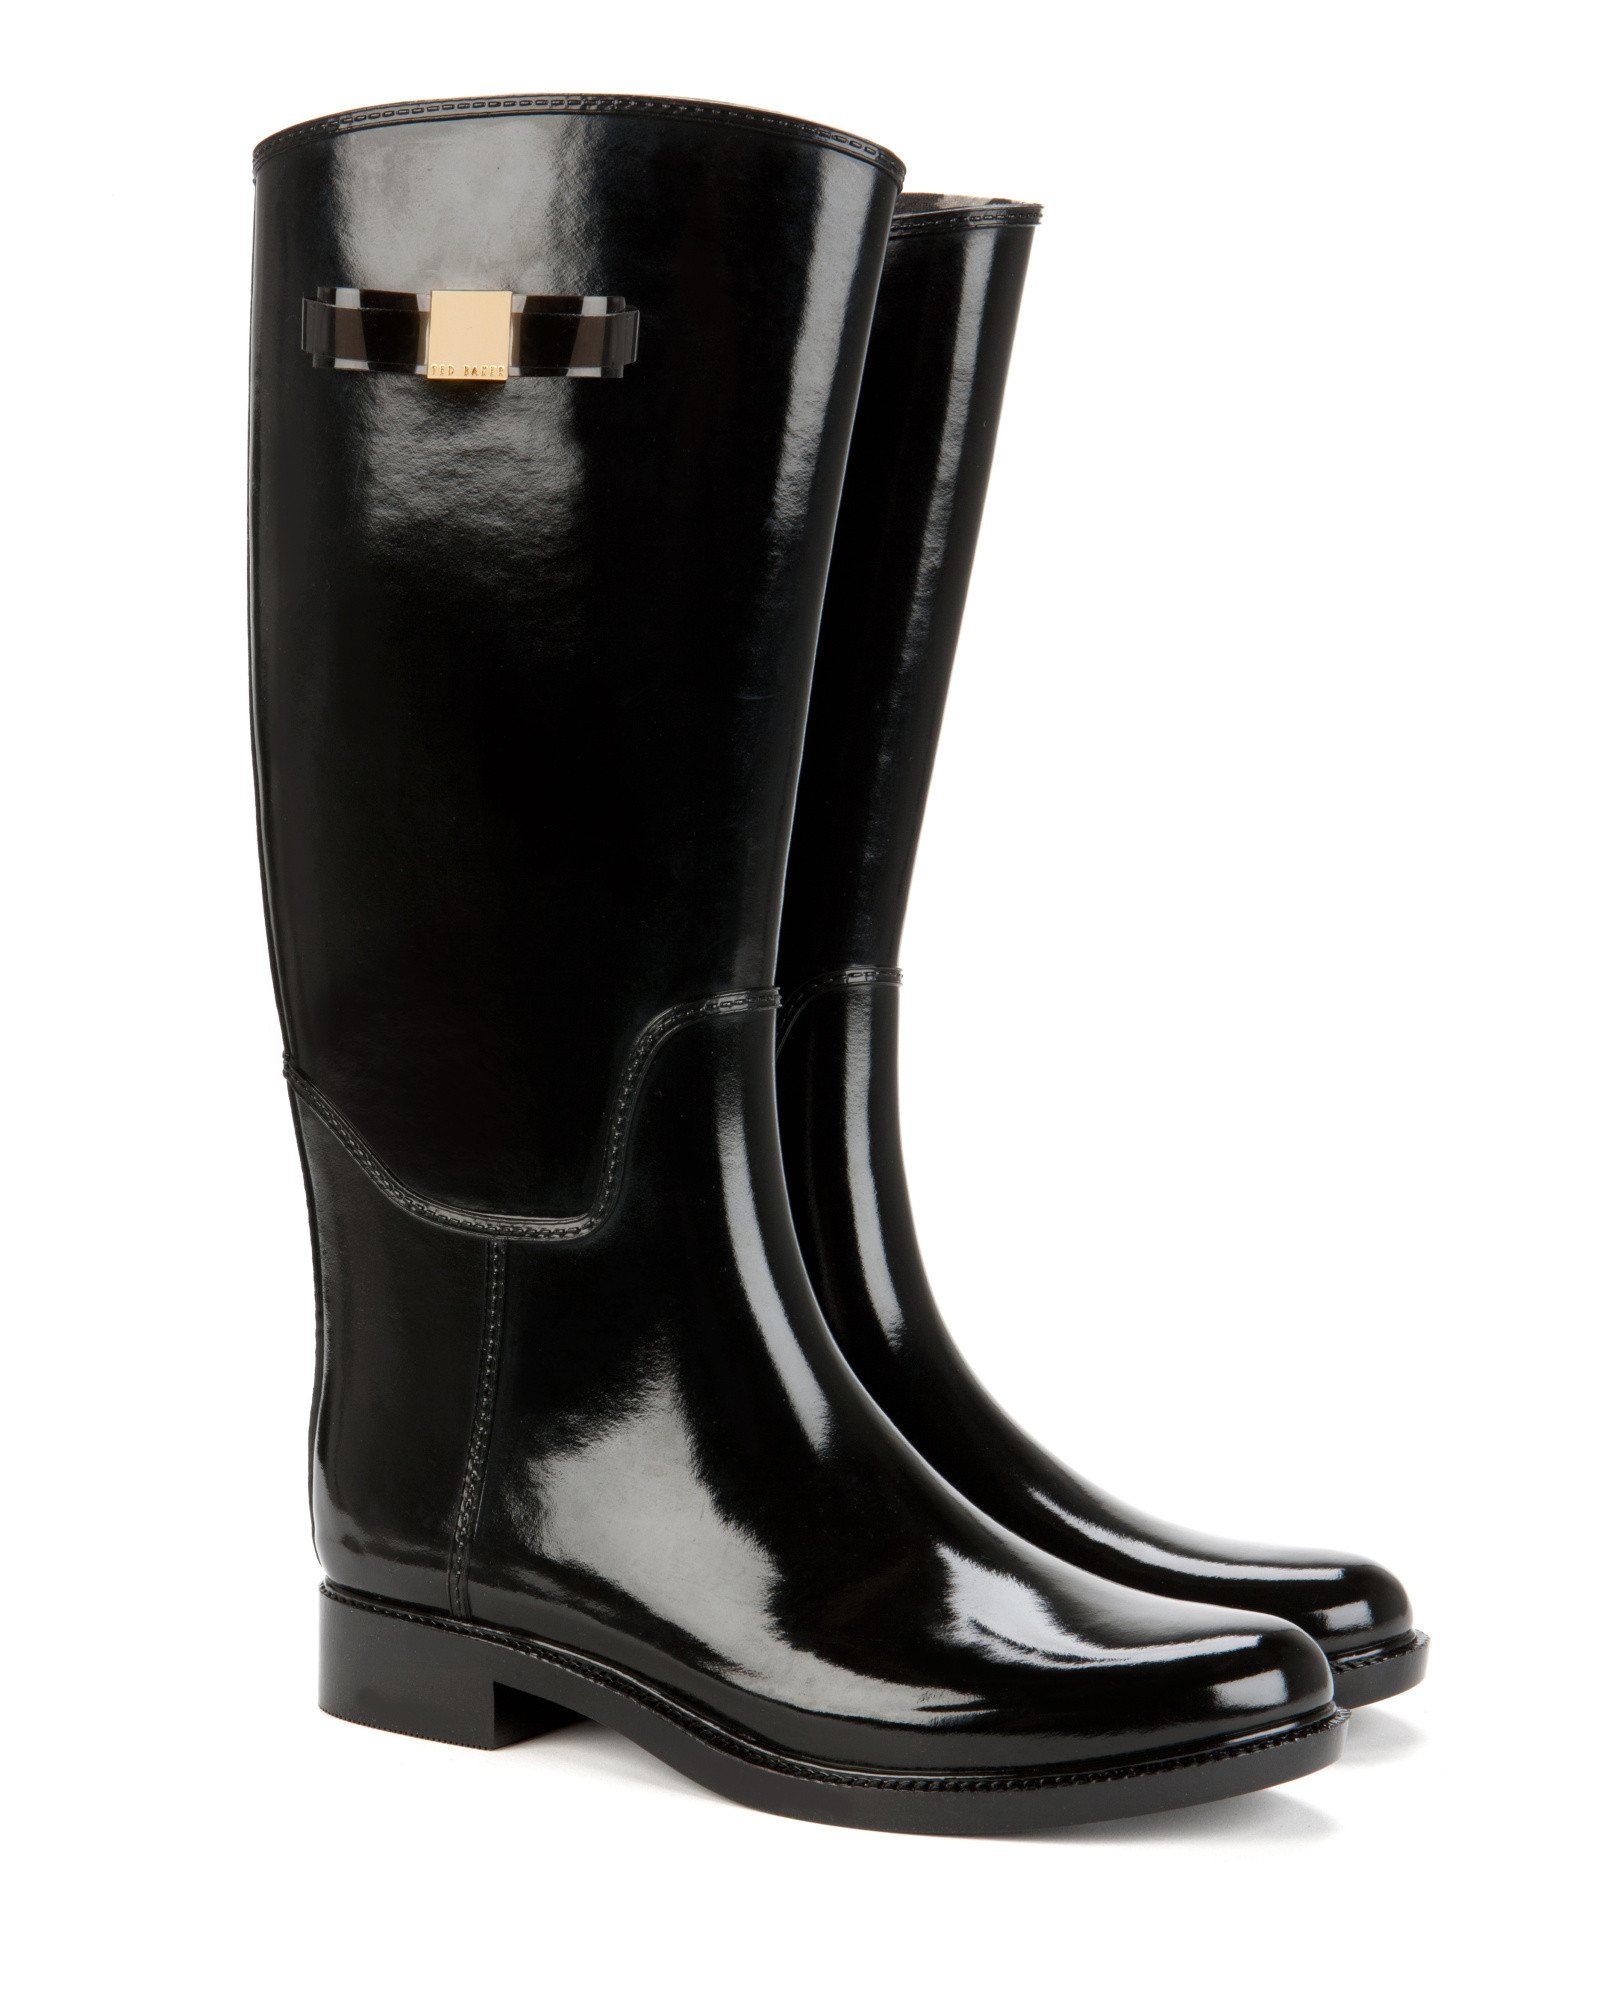 Ted Baker Bow Wellington Boot in Black - Lyst